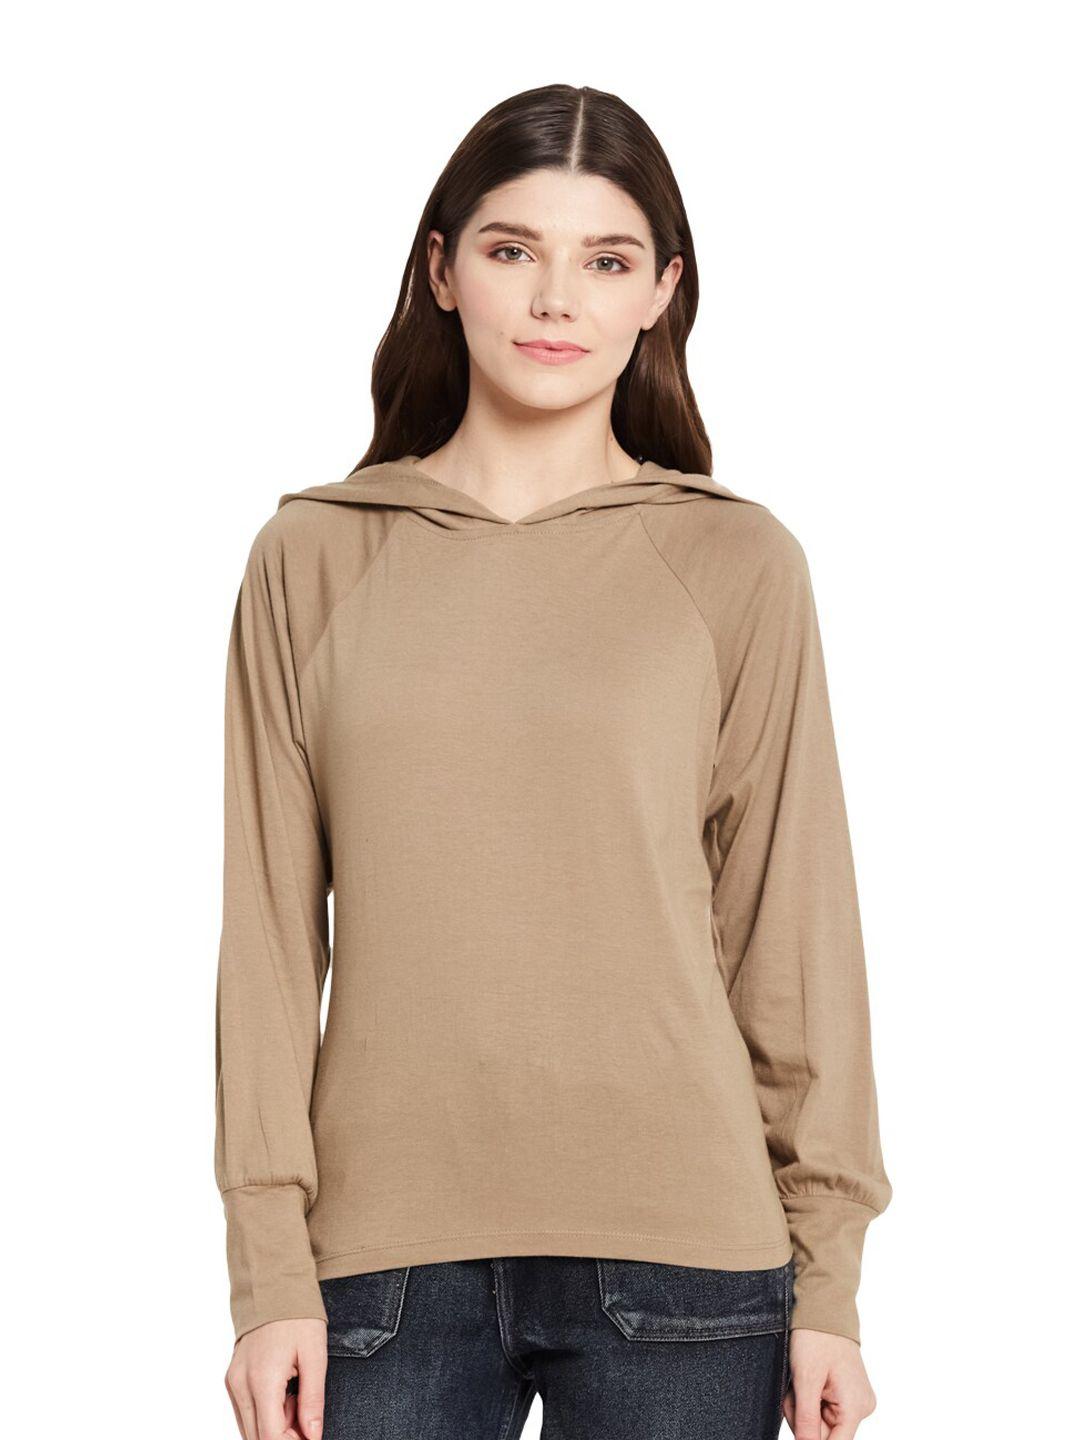 unmade women camel brown solid hooded top